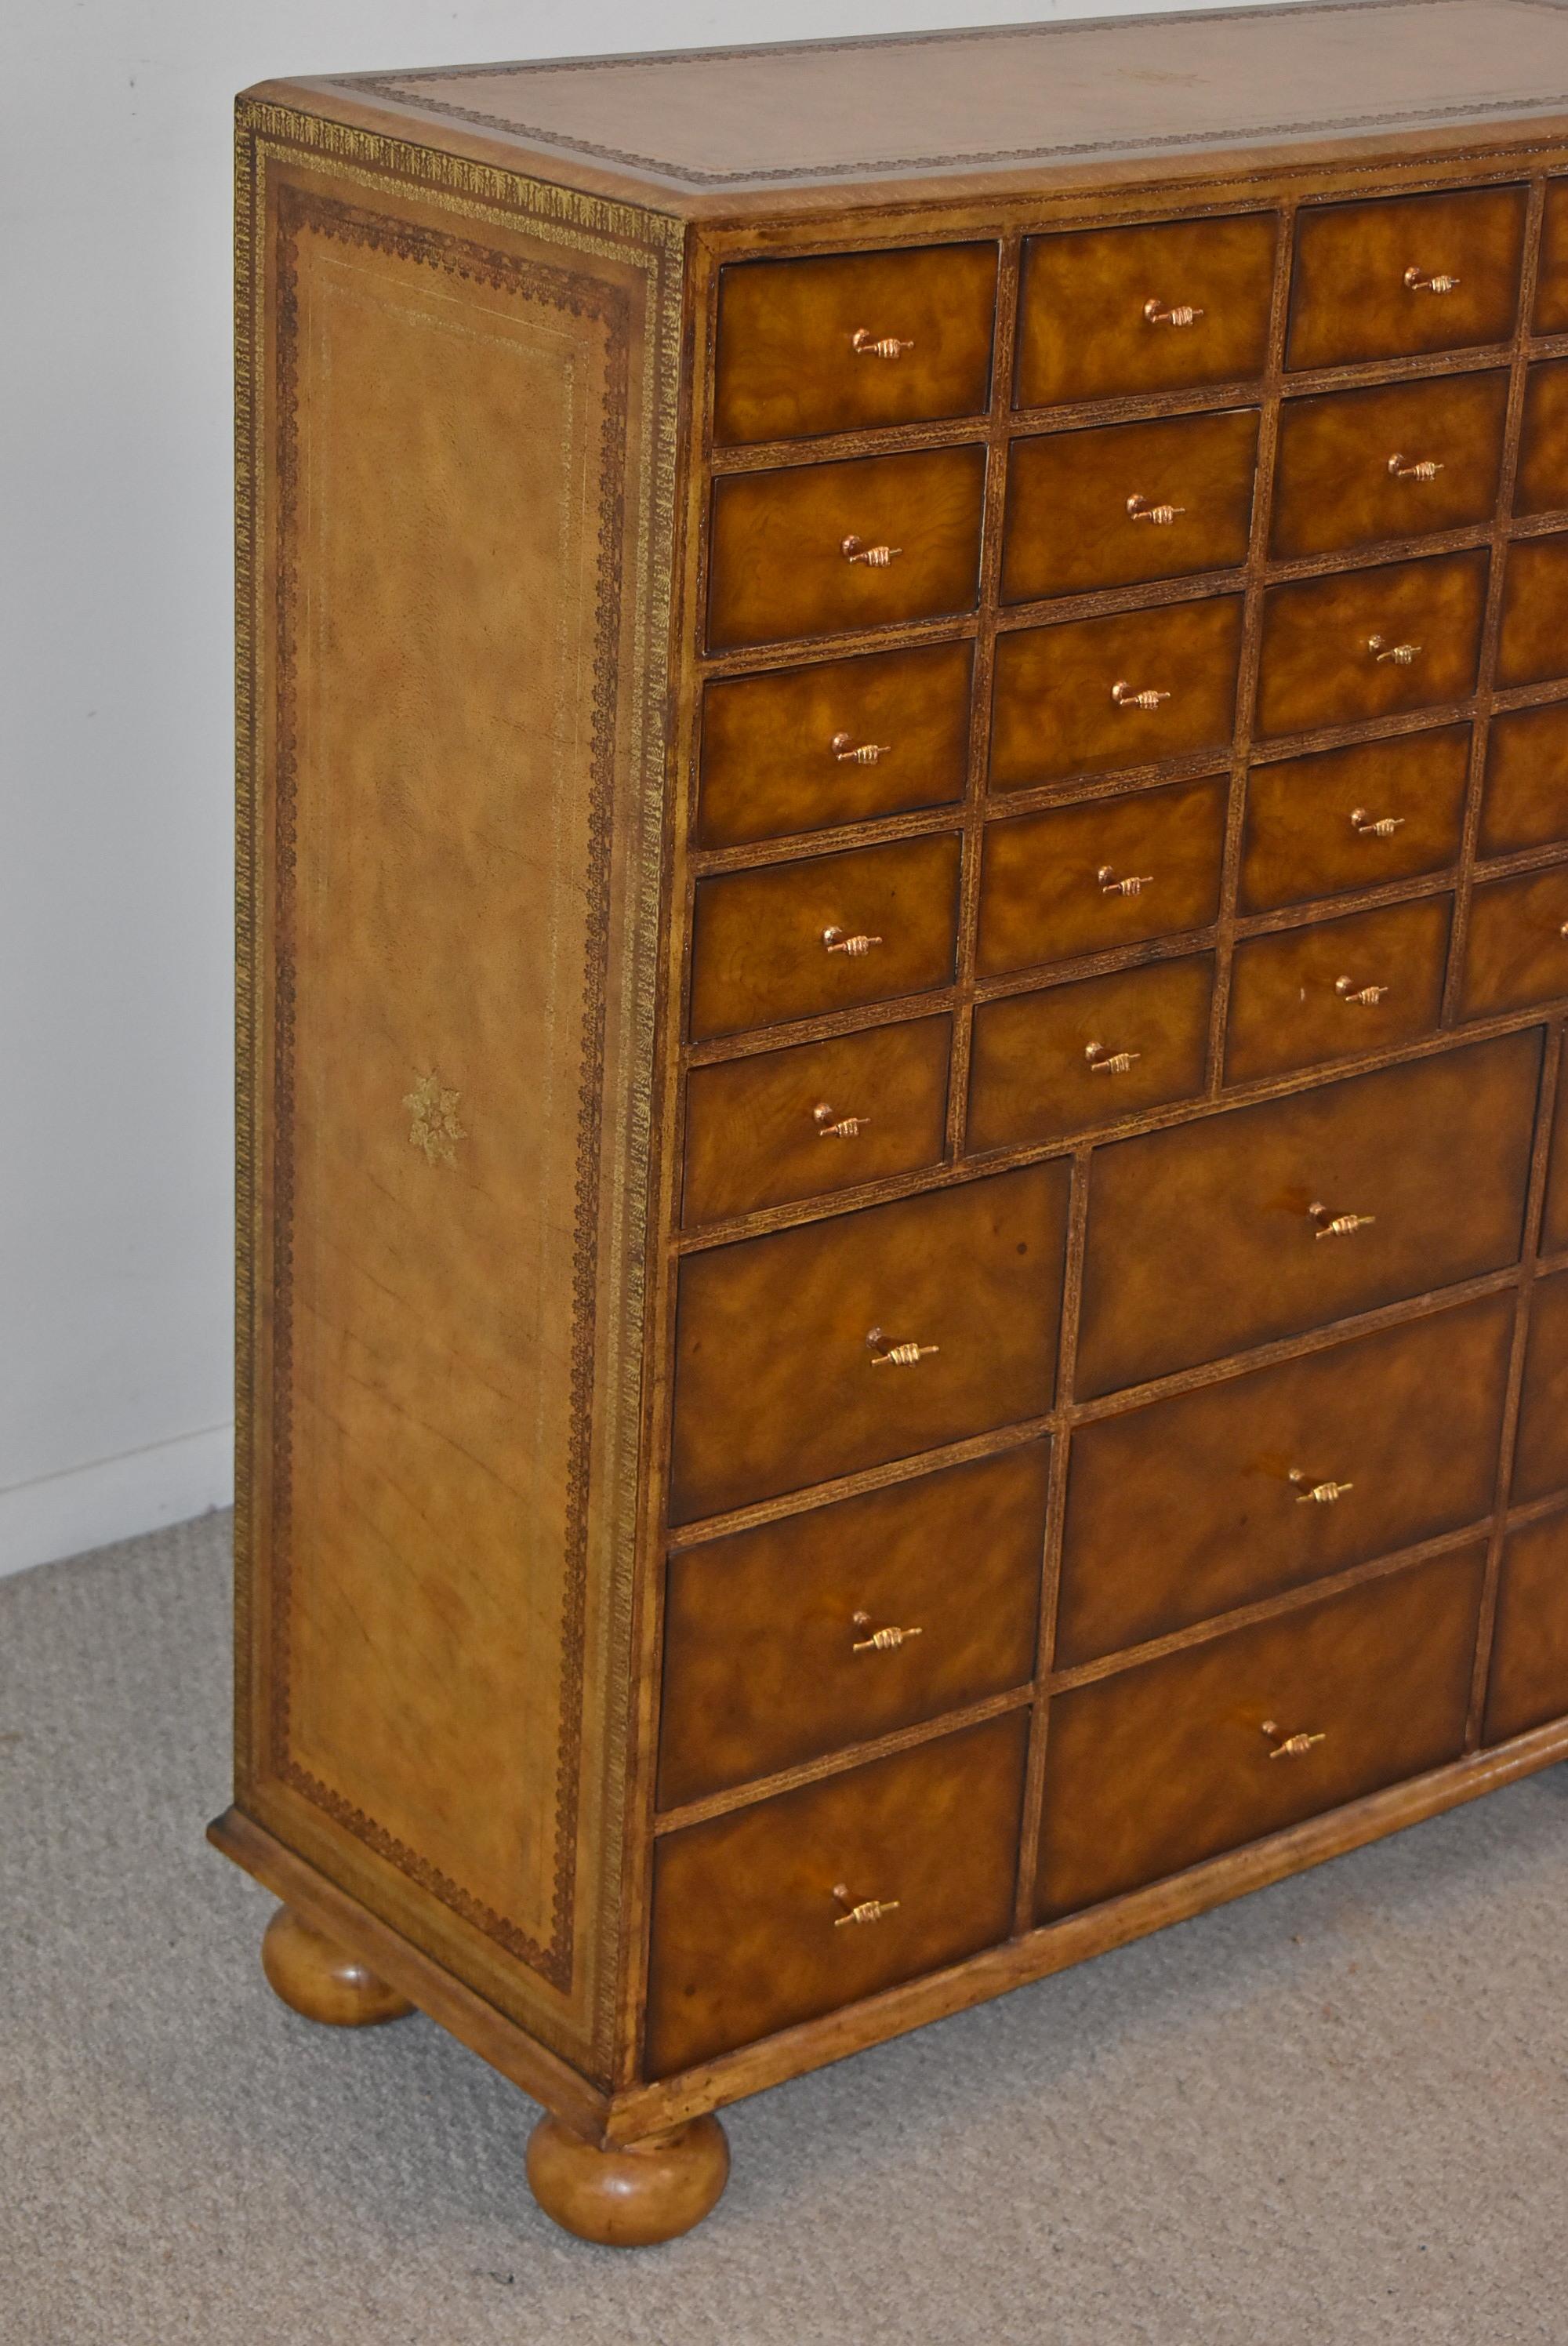 This beautiful Maitland Smith apothecary cabinet with 34 drawers is wrapped in tooled leather. The drawers fronts are made from burled walnut and are adorned with copper tone pulls in the shape of a hand. This piece is in excellent pre-owned